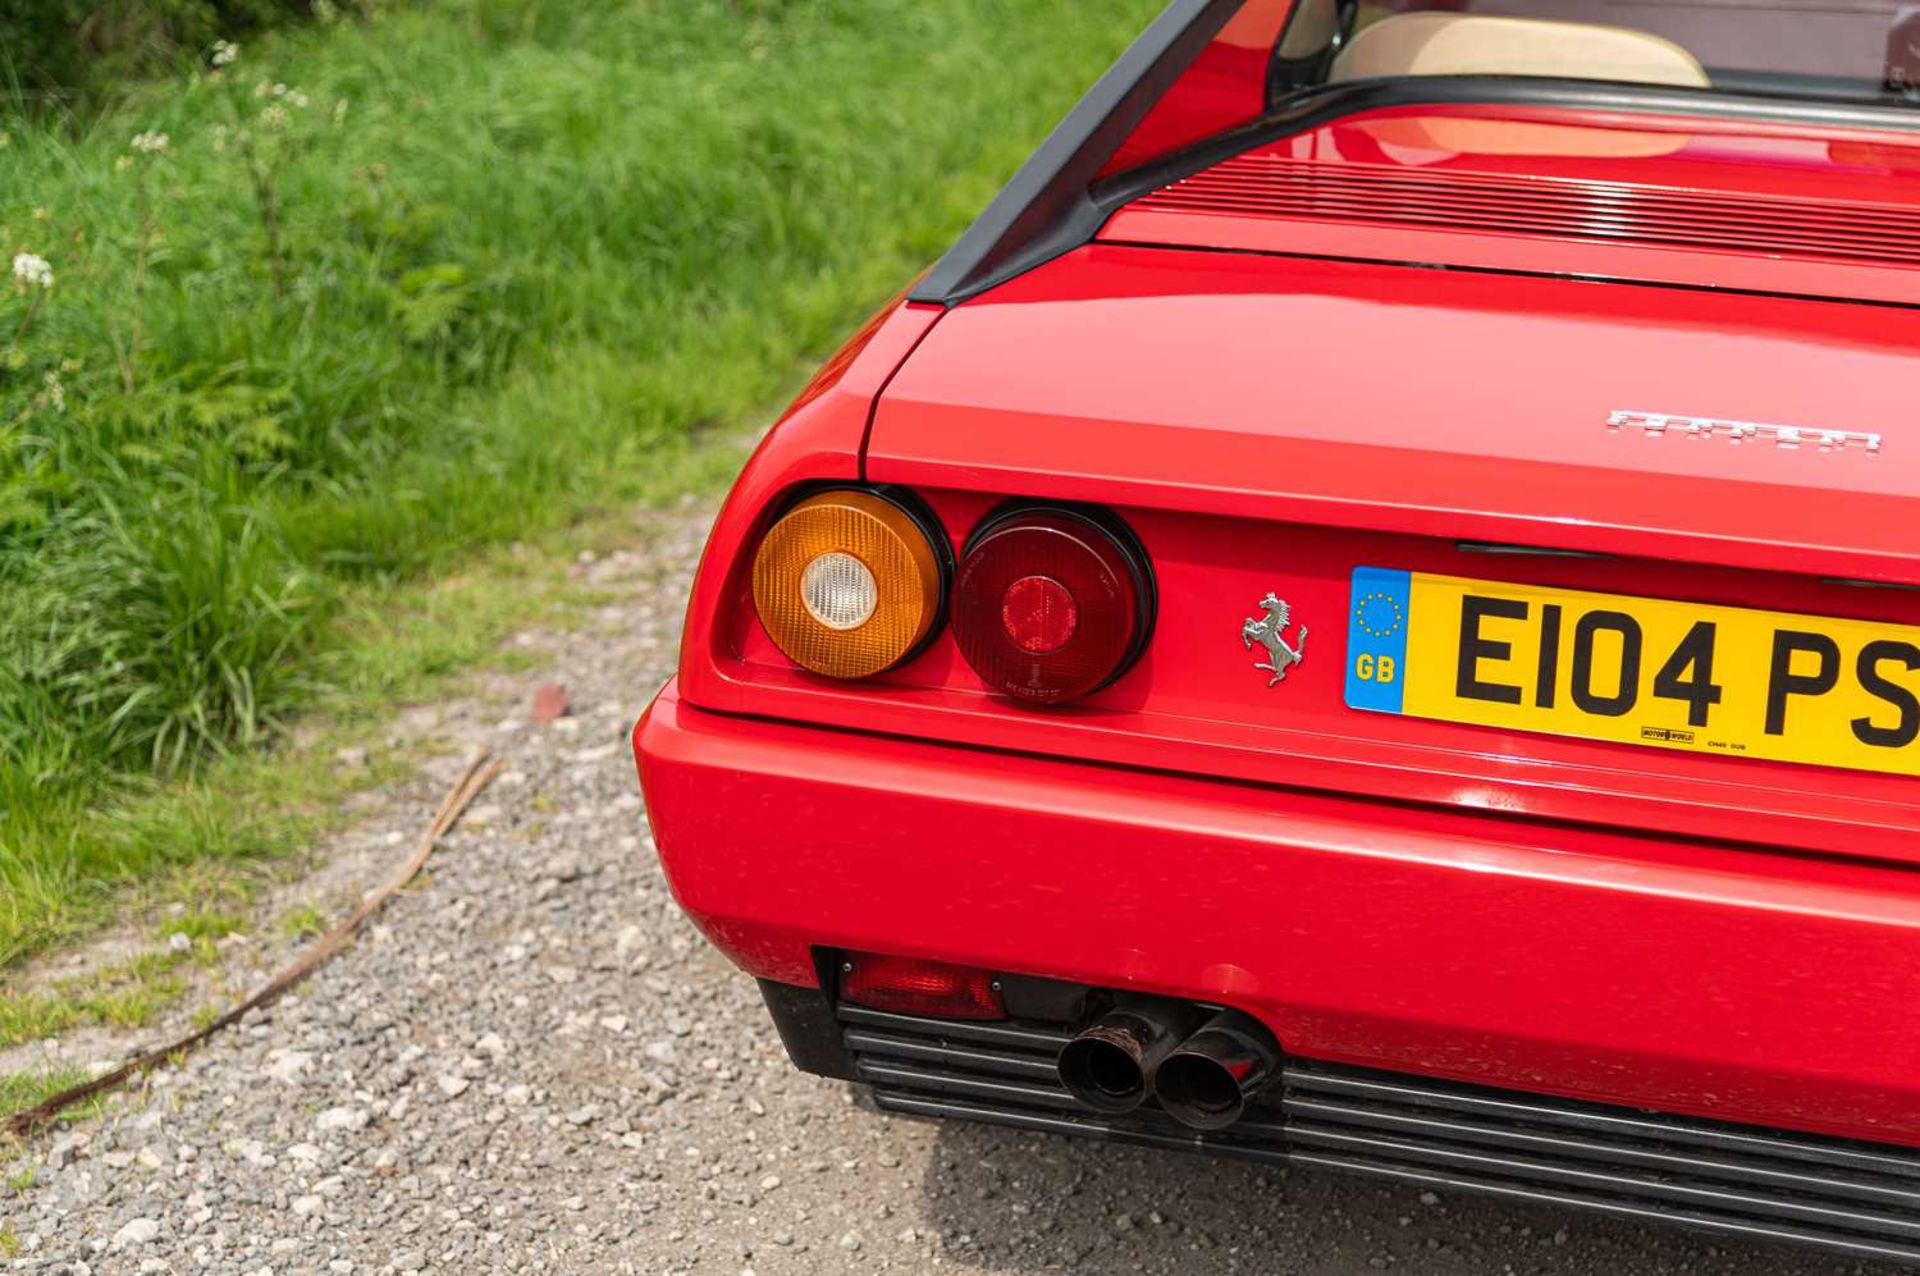 1988 Ferrari Mondial QV ***NO RESERVE*** Remained in the same ownership for nearly two decades finis - Image 23 of 91